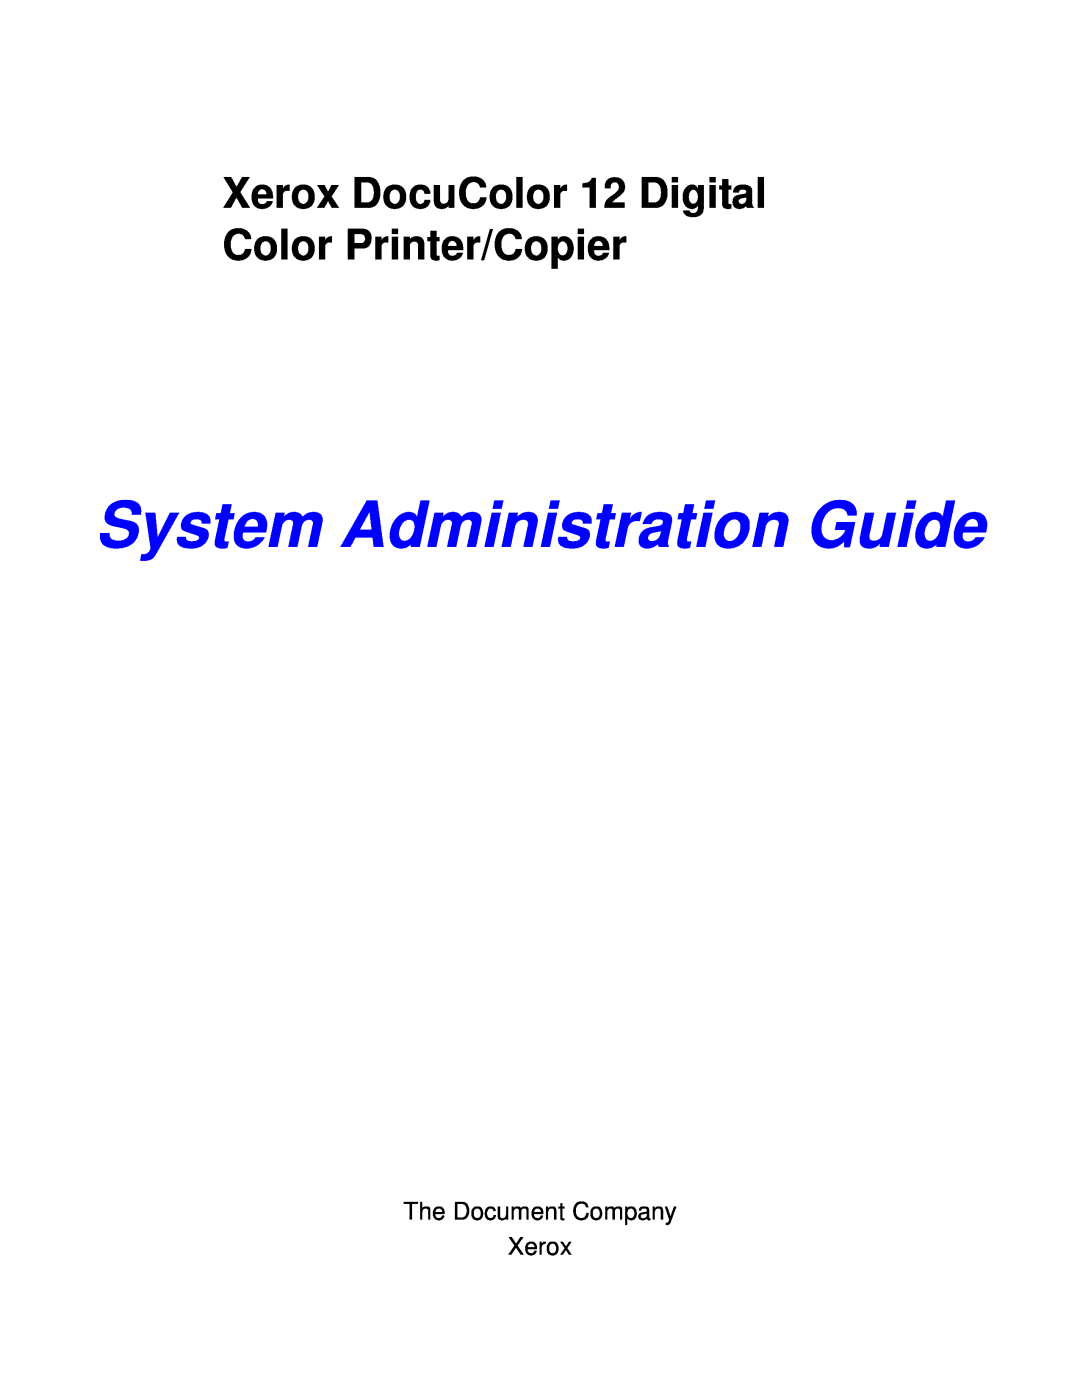 Xerox a2 manual The Document Company Xerox, System Administration Guide, Xerox DocuColor 12 Digital Color Printer/Copier 